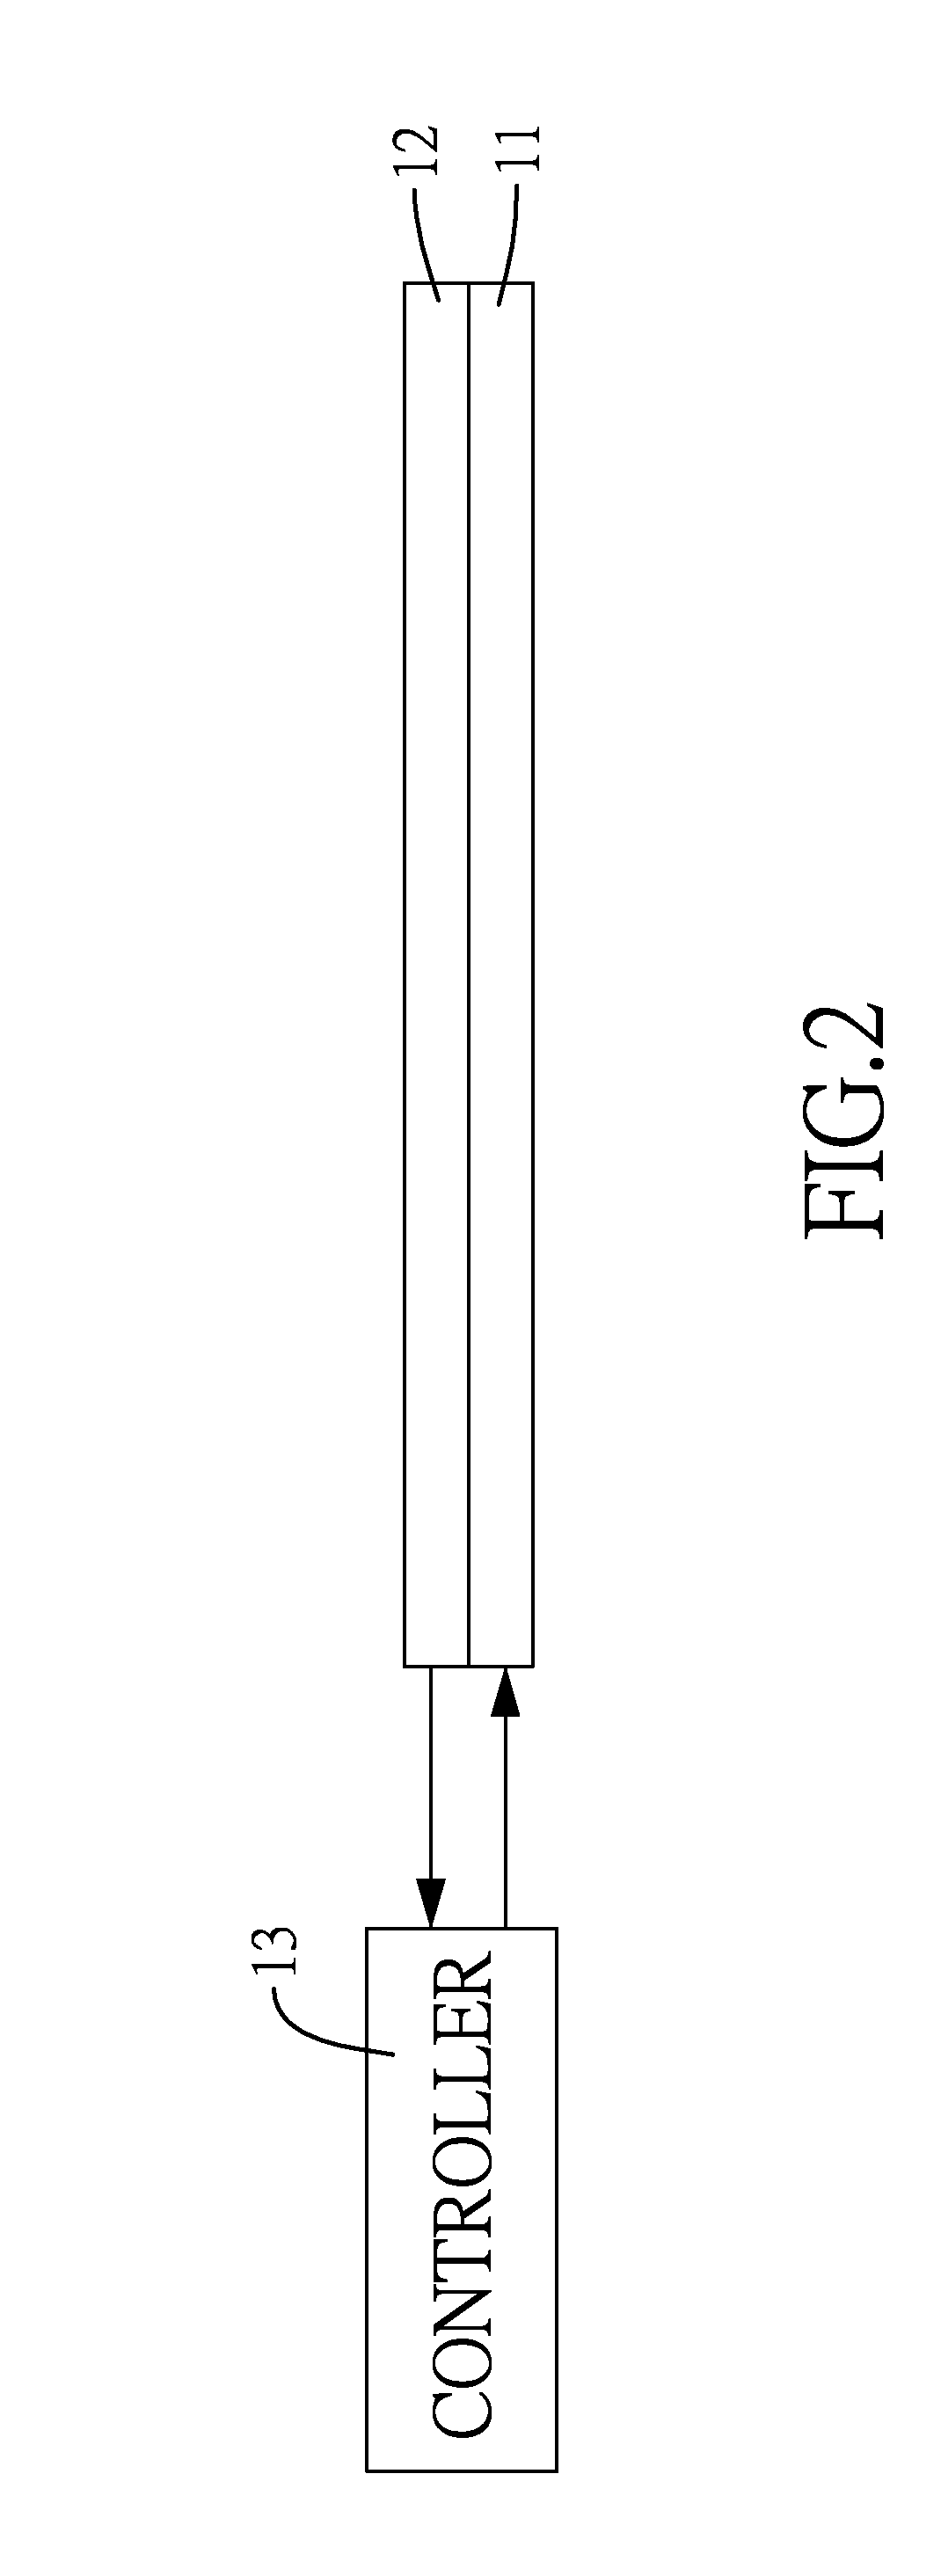 Electronic device and method for identifying window control command in a multi-window system